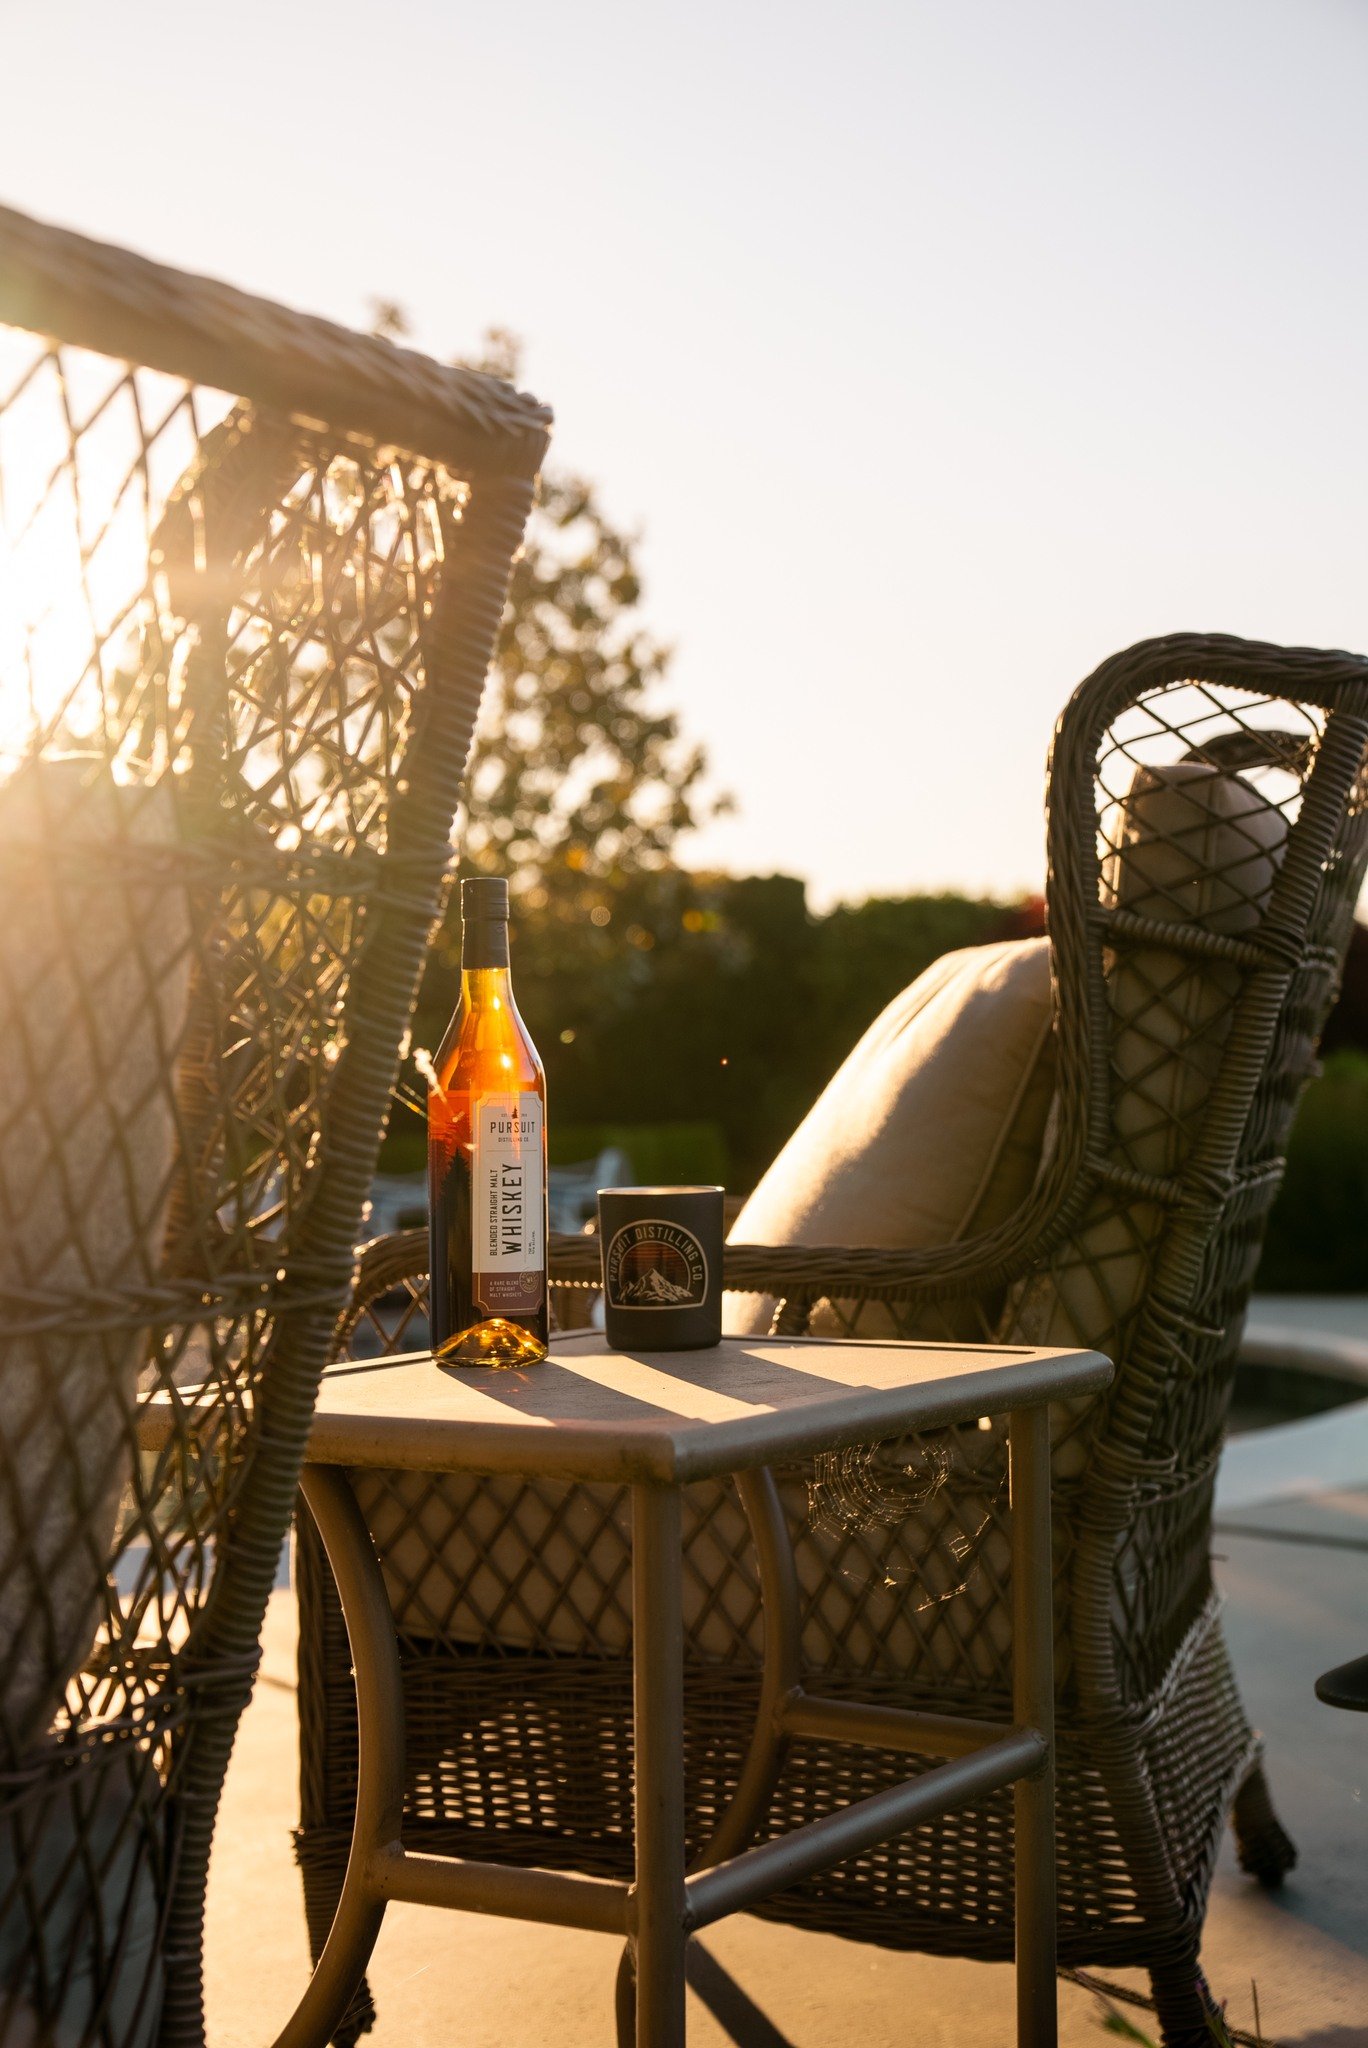 Pool-side #Whiskey on a summer day is something to look forward to and guess what! We&rsquo;re just about there! Grab your favorite Pursuit #CraftWhiskey and enjoy the summer days that are just around the corner. 🥃

- 
- 
- 
- 

#DistillingExperienc